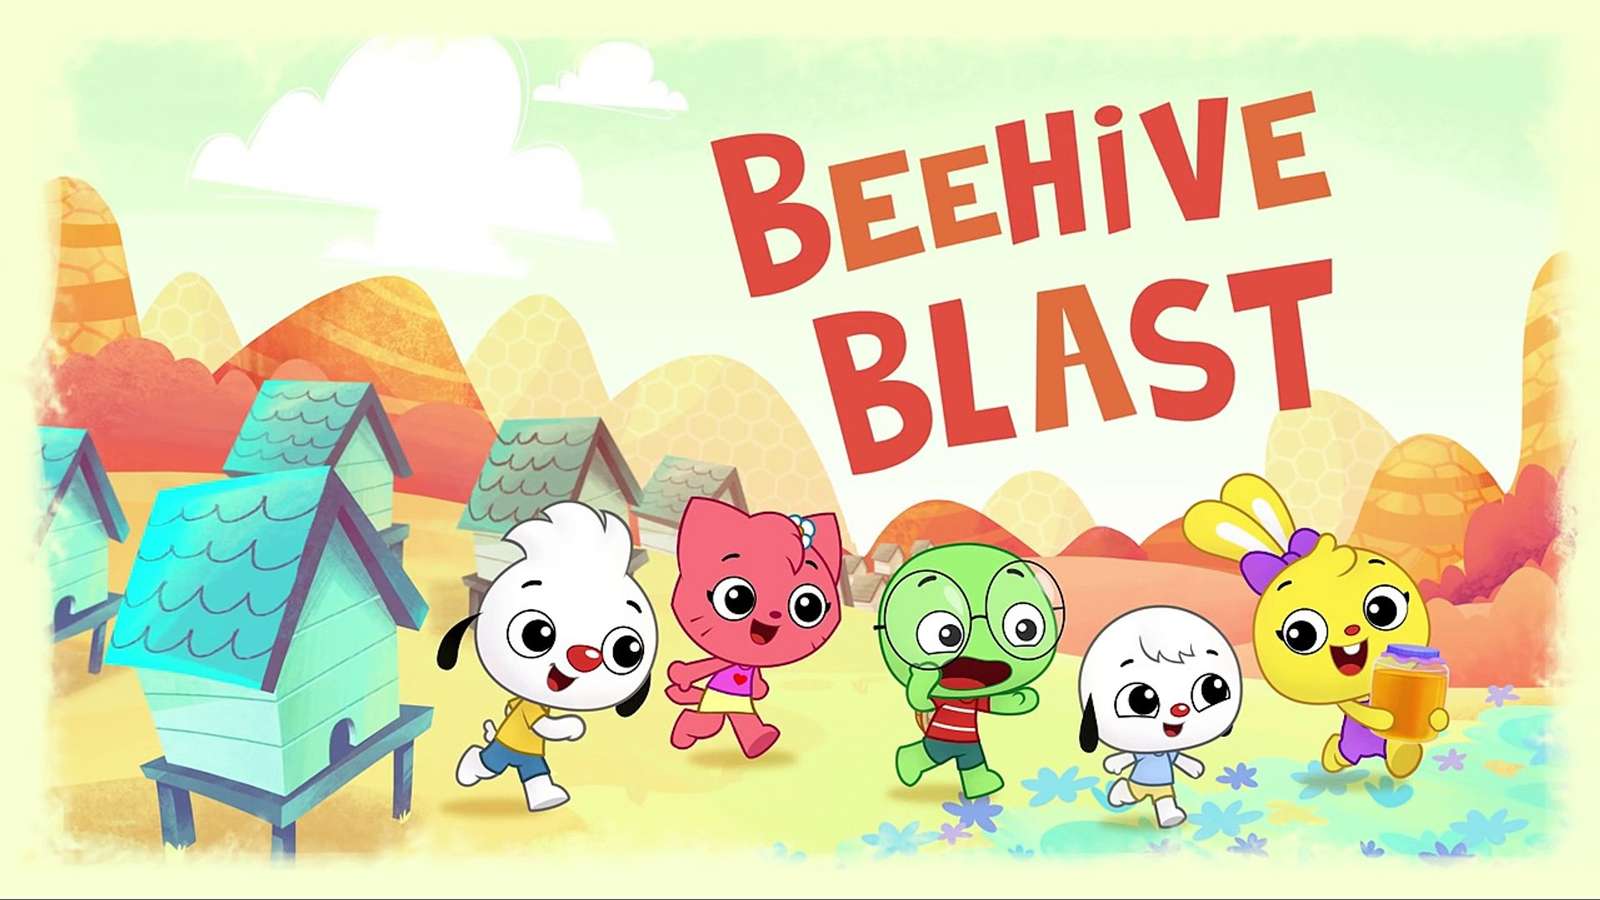 Beehive Blast puzzle online from photo